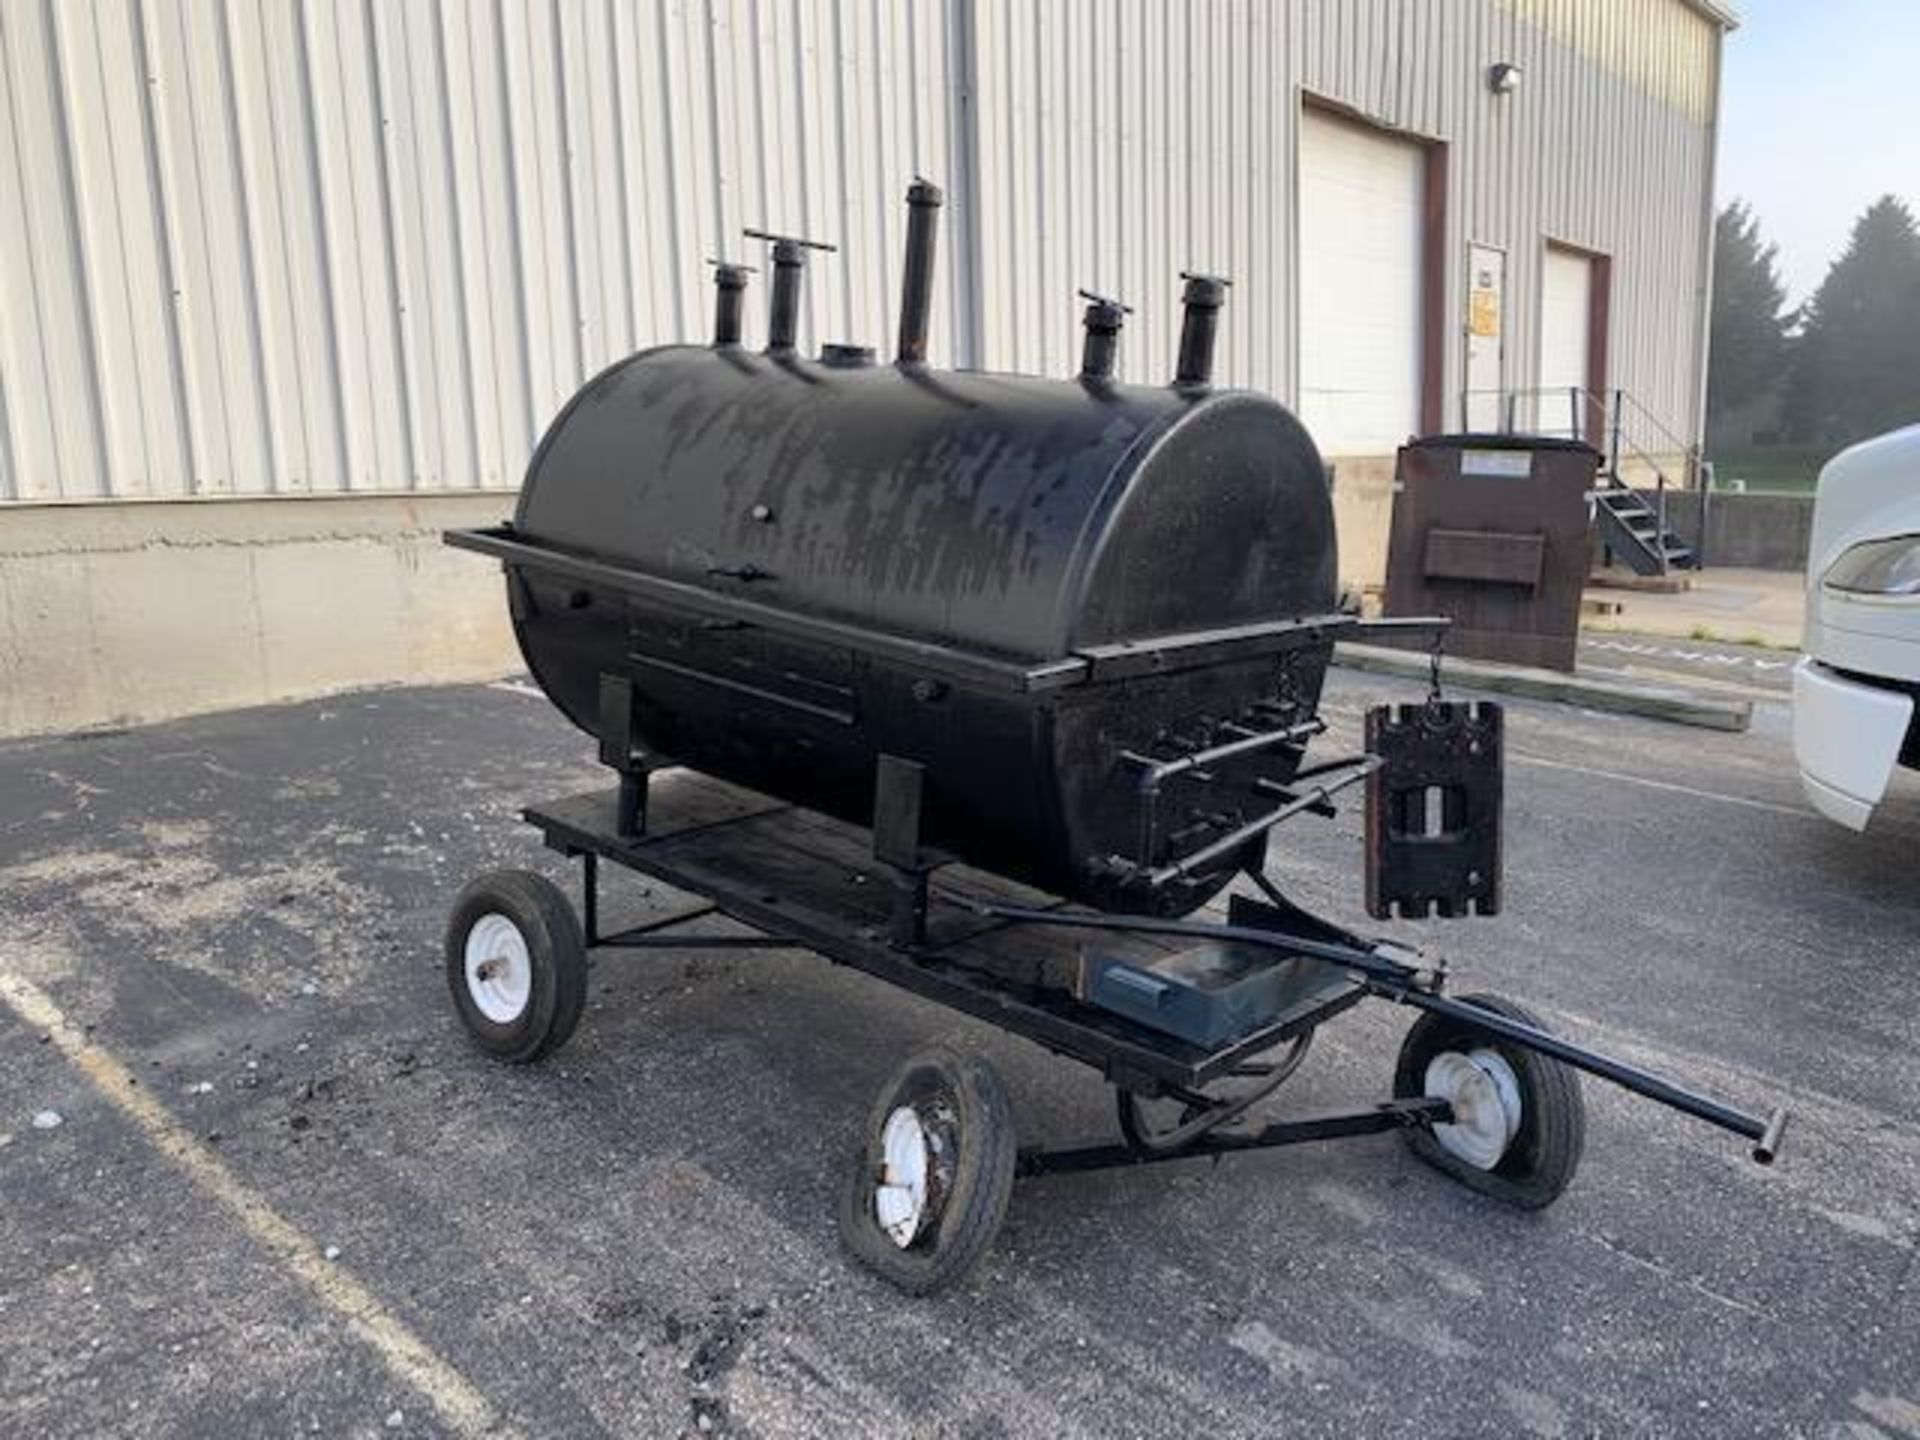 Custom made mobile BBQ grill, uses propane gas (has two flat tires)